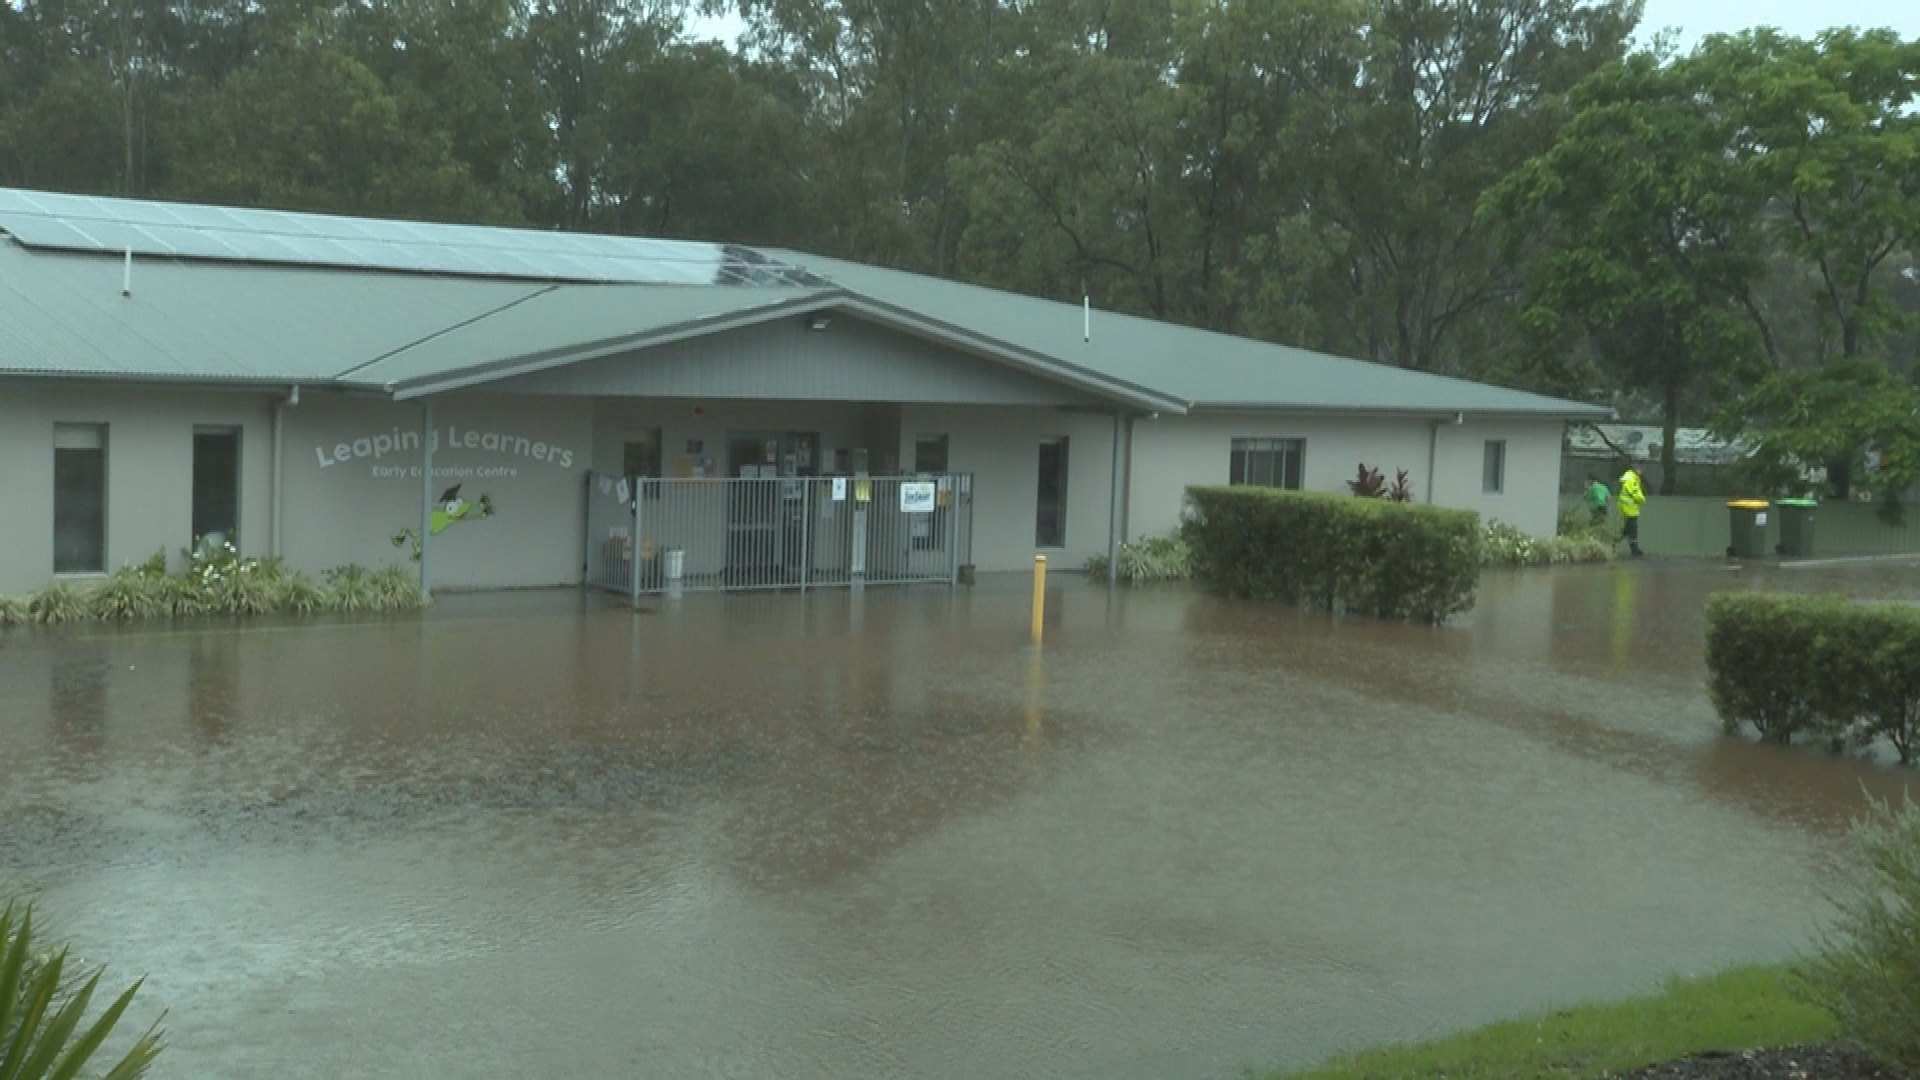 Sydney childcare centre filled with floodwaters sparking evacuation.